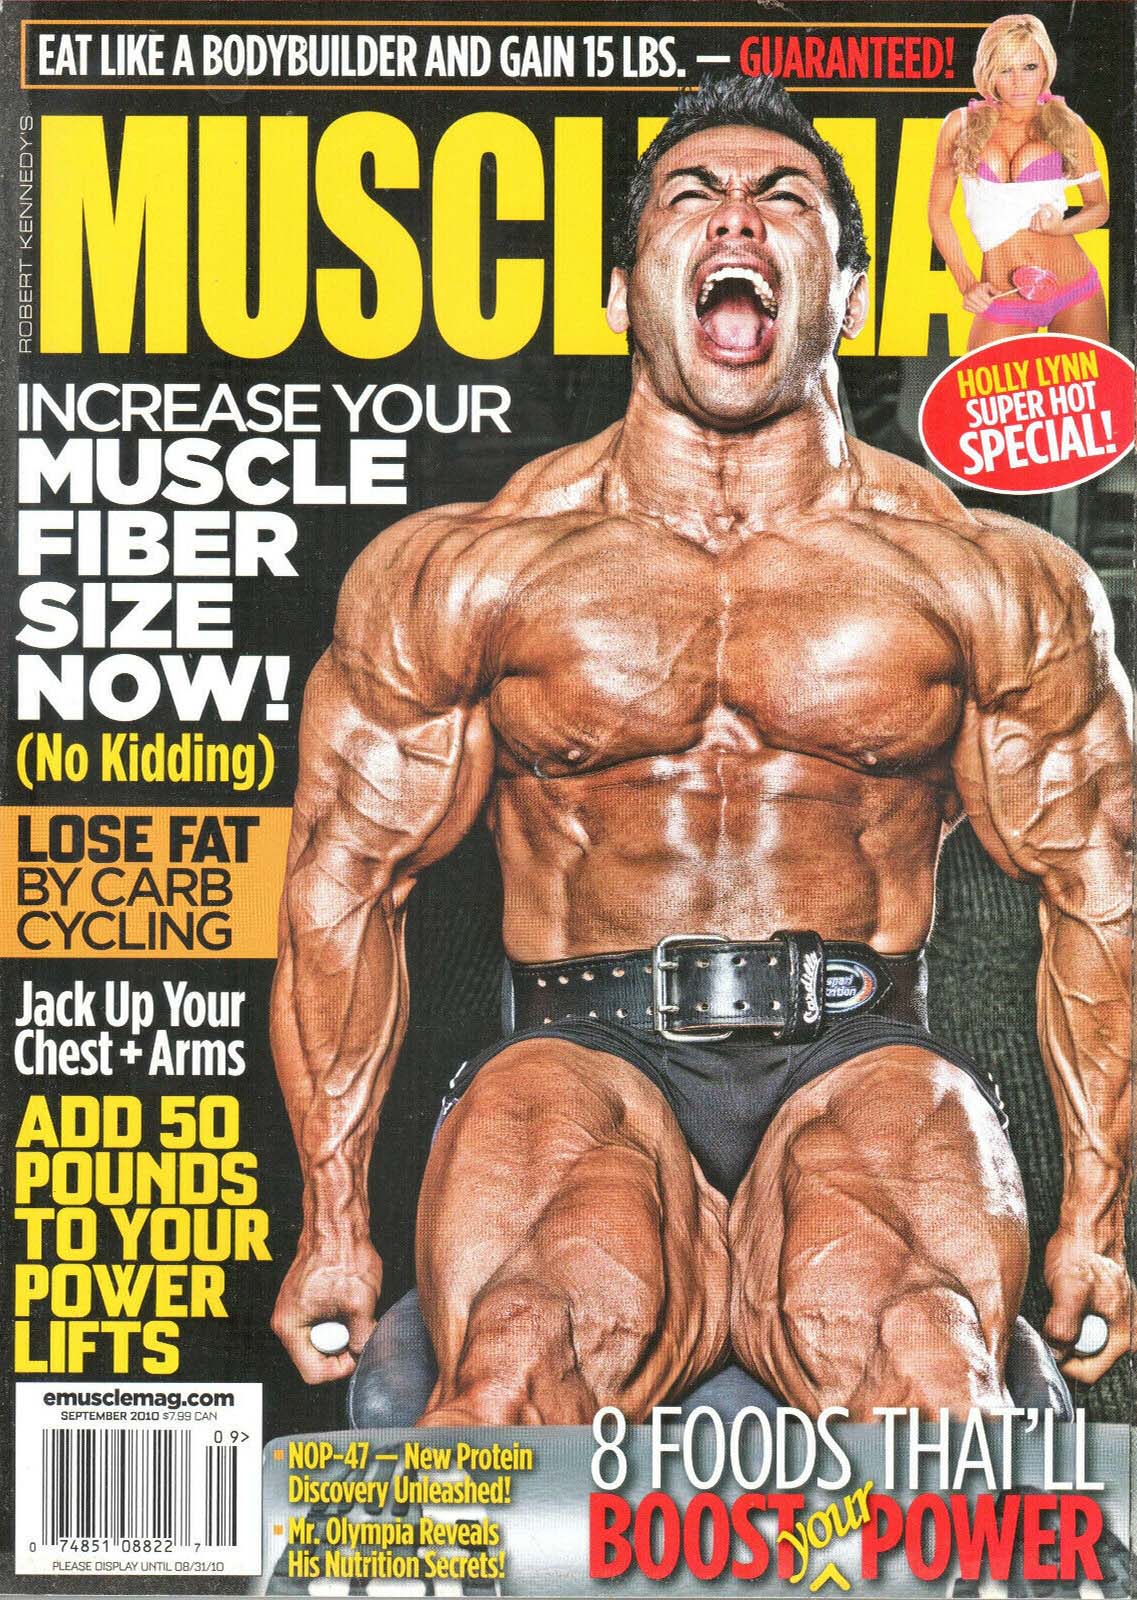 Muscle Mag September 2010 magazine back issue Muscle Mag magizine back copy Muscle Mag September 2010 Bodybuilding and Fitness Magazine Back Issue Published by Canadian Robert Kennedy and Founded in 1974. Eat Like A Bodybuilder And Gain 15 LBS. - Guaranteed!.